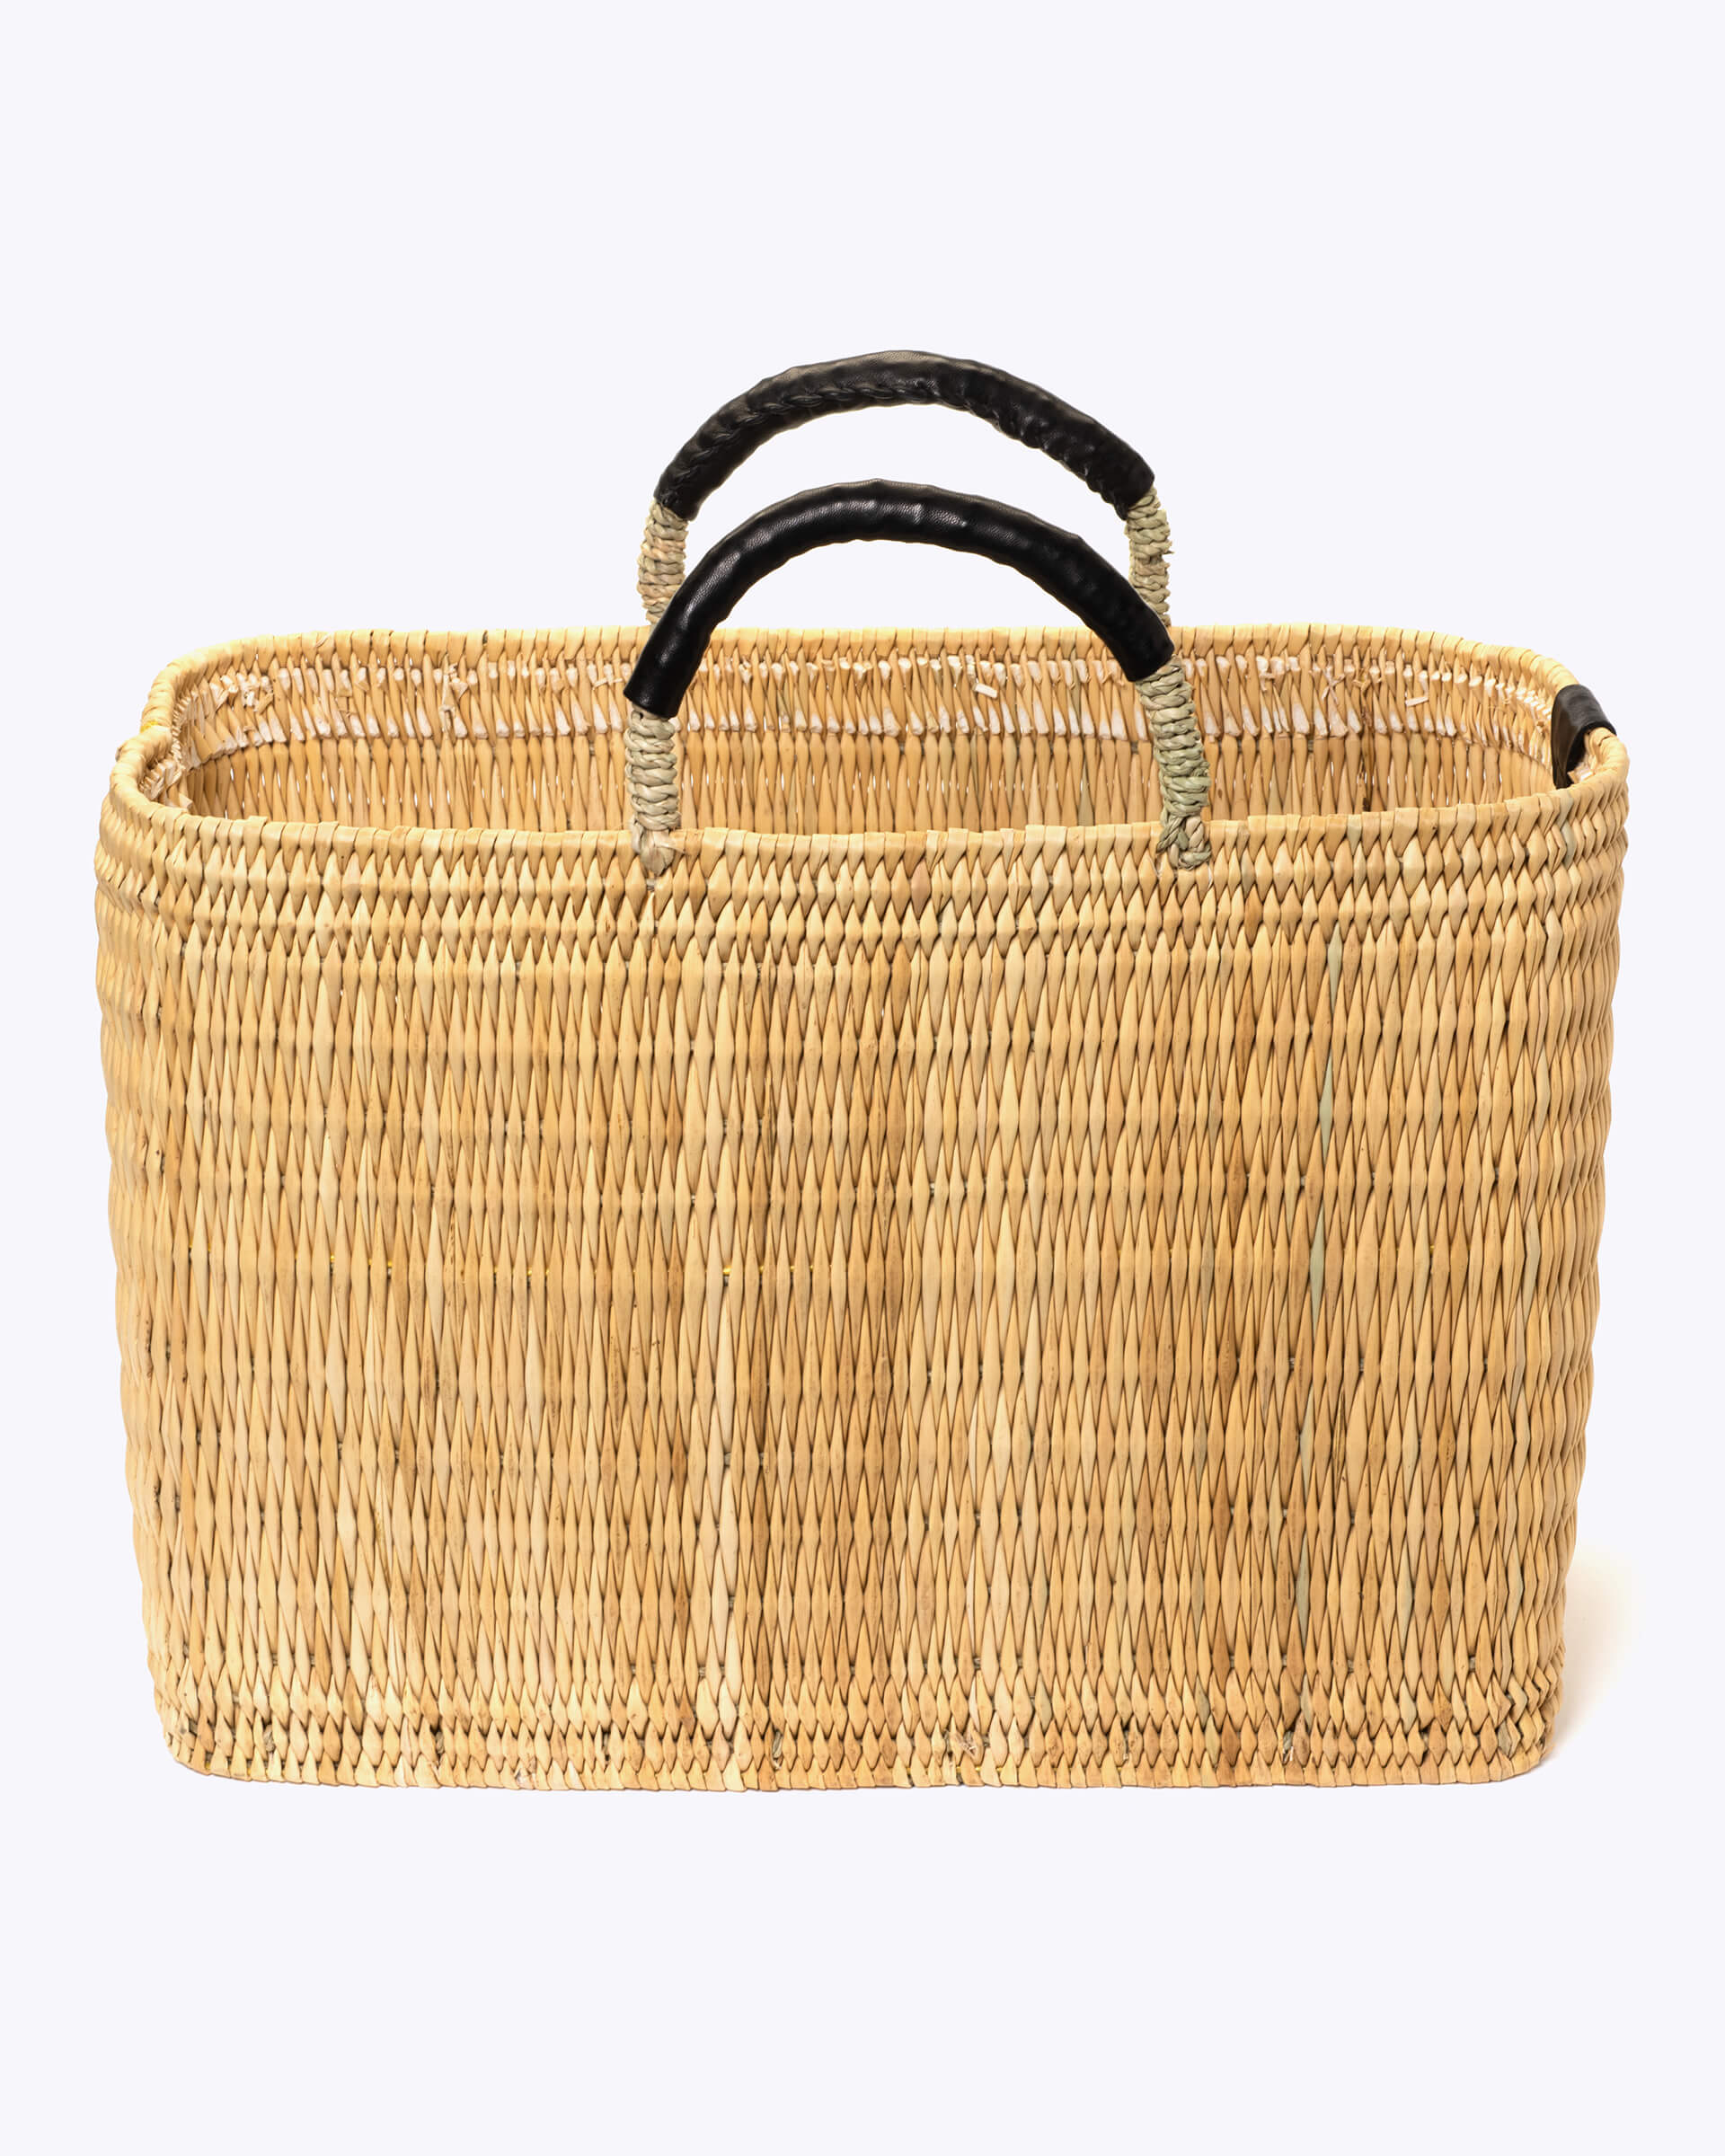 large straw basket wrapped with black leather handle on a white background 